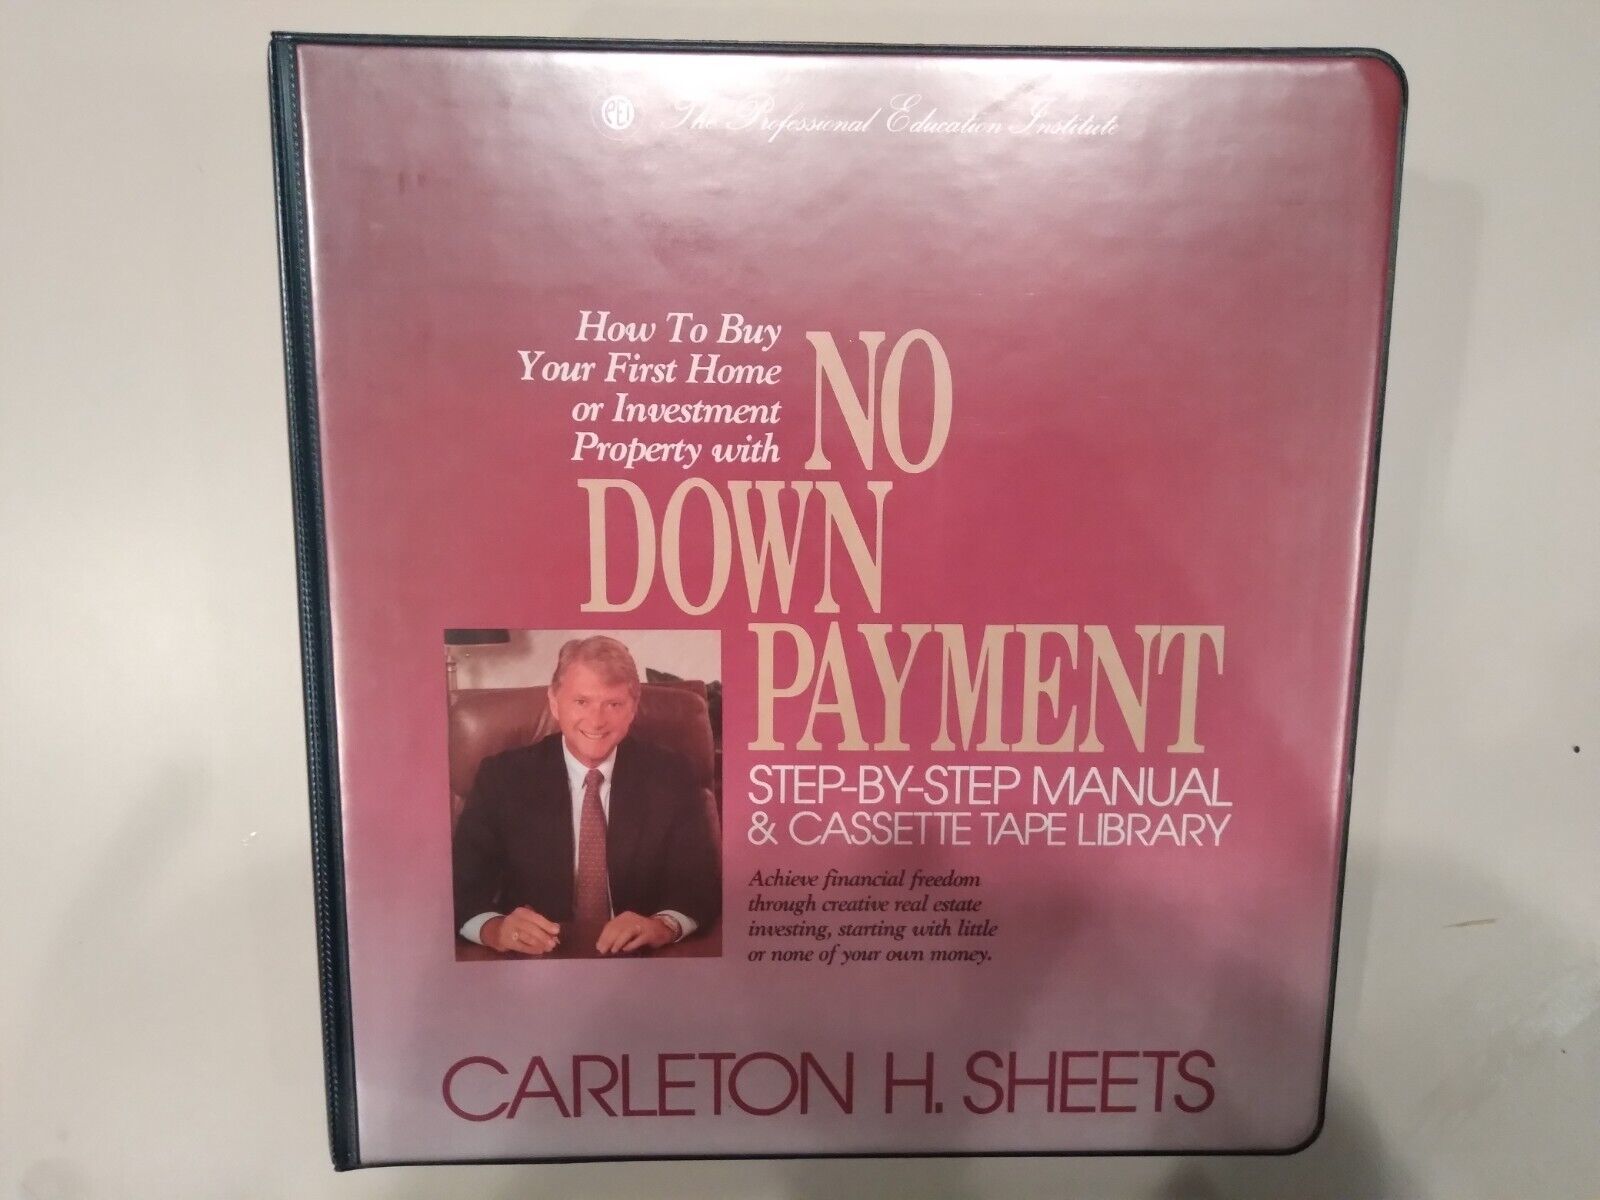 Carlton Sheets "no Money Down" Real Estate Audio Cassette Tape Library & Manuals